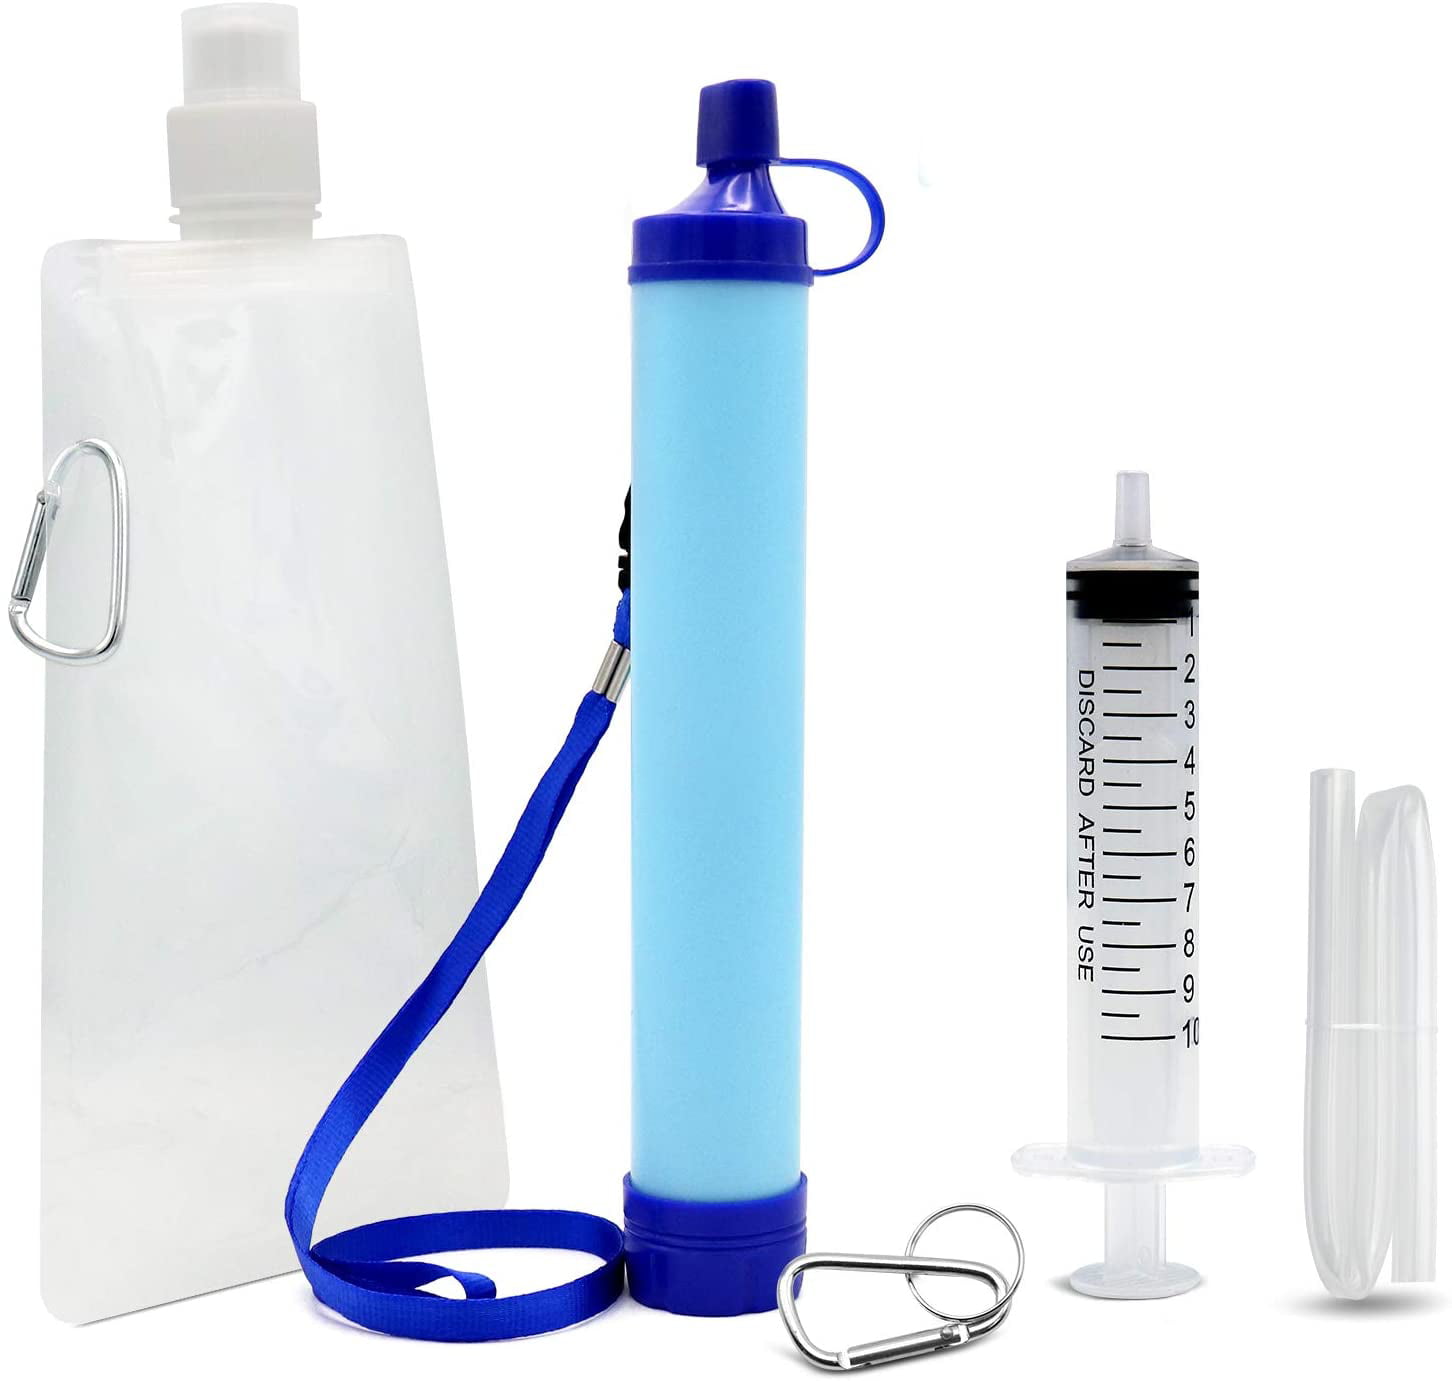 Hiking Camping Travel Emergency Survival Life Straw NEW Outdoor Water Filter 